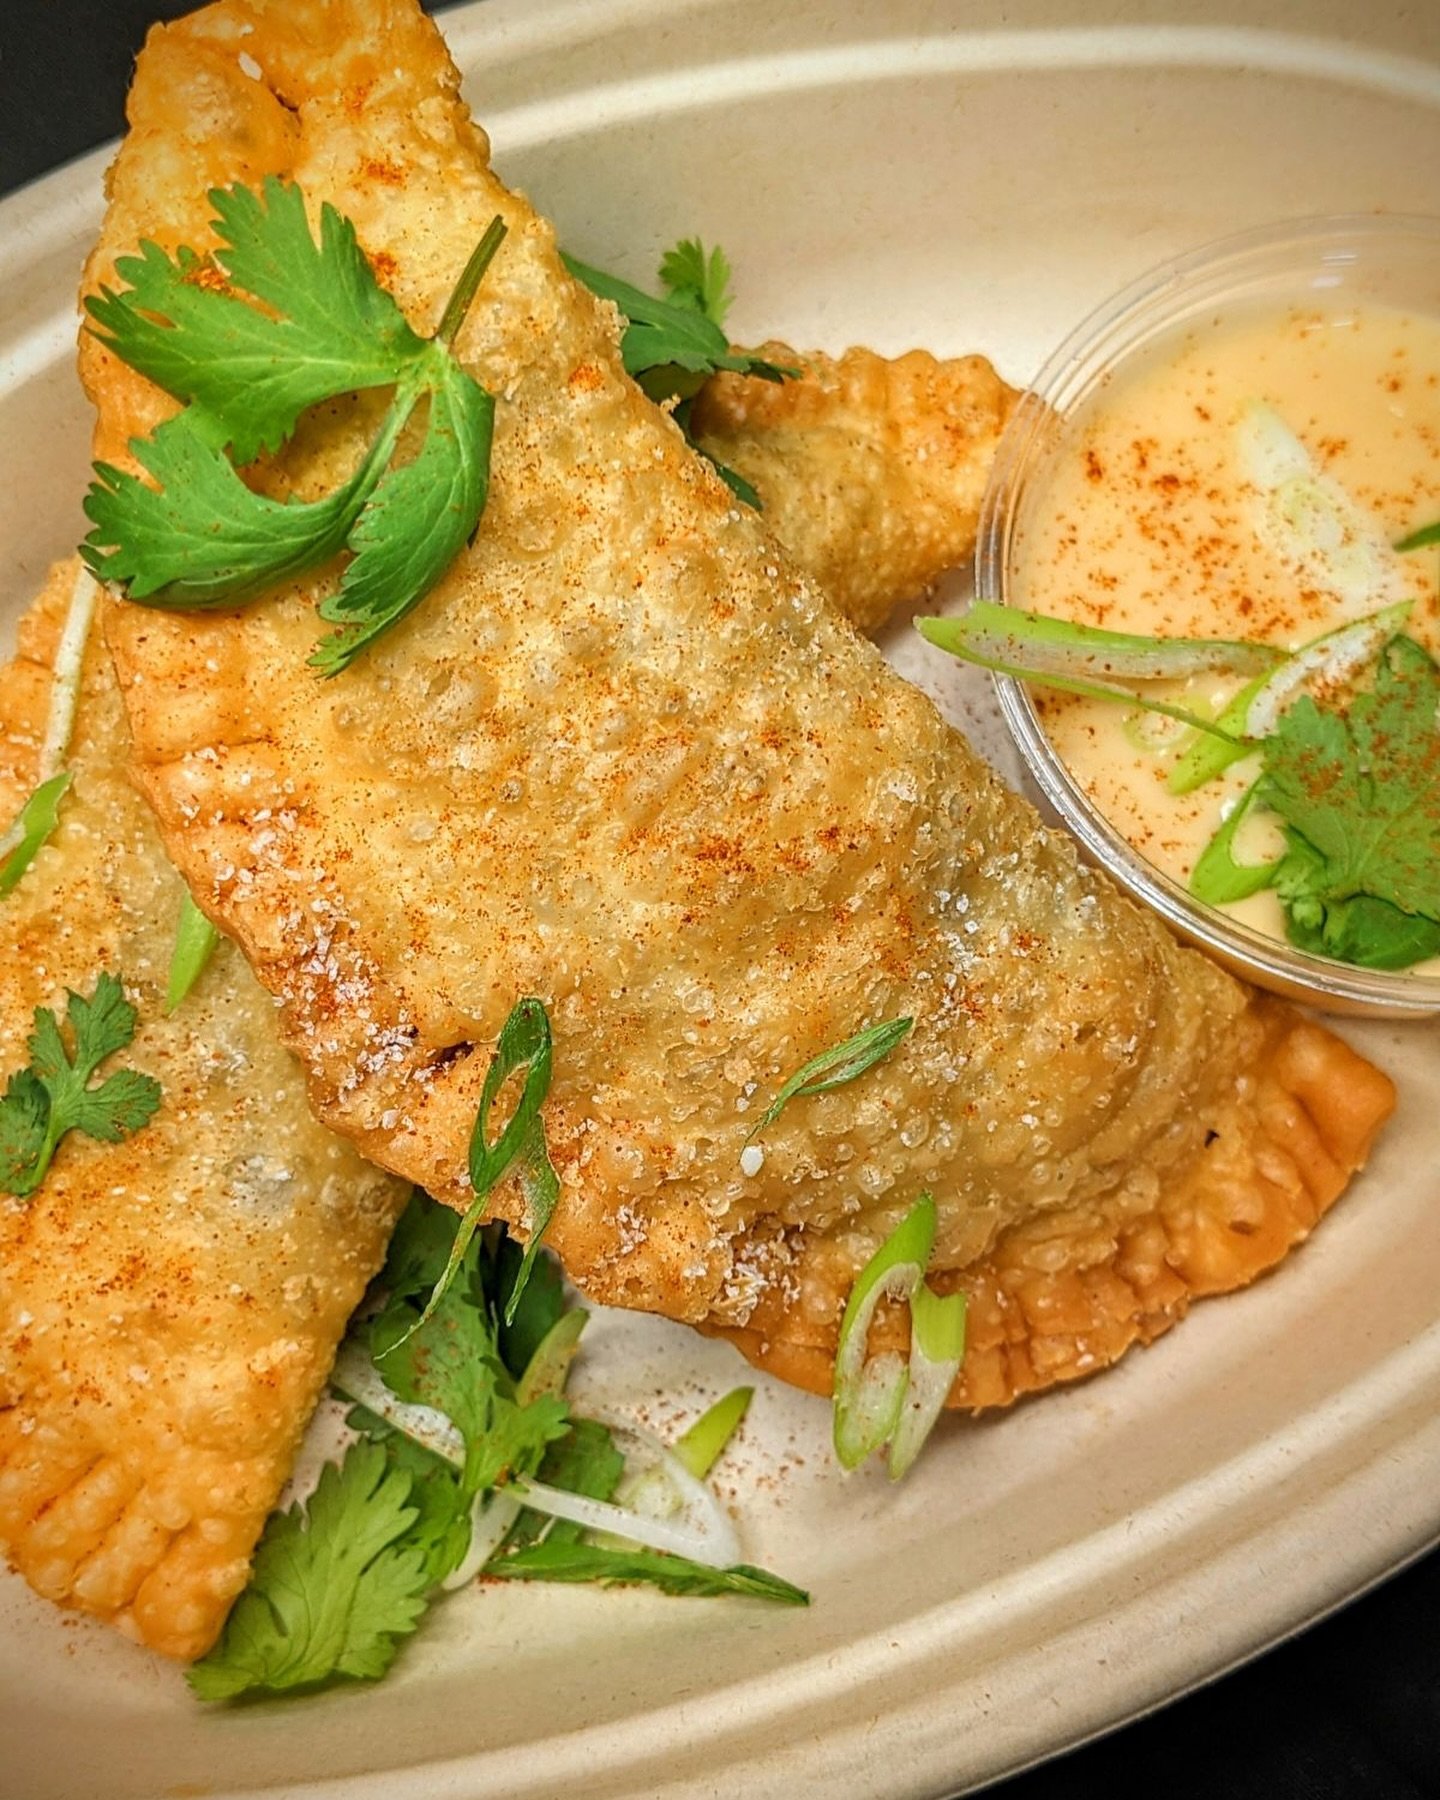 Saturday appetizer special: smoked chicken empanadas! Purple rice, cheddar-jack cheese, tomato, bell pepper, zucchini &amp; chipotle-garlic queso dip! We&rsquo;re open at  12pm with The Traveling Newburys from 6:30pm-9:30pm! 
&bull;
&bull;
&bull;
#su